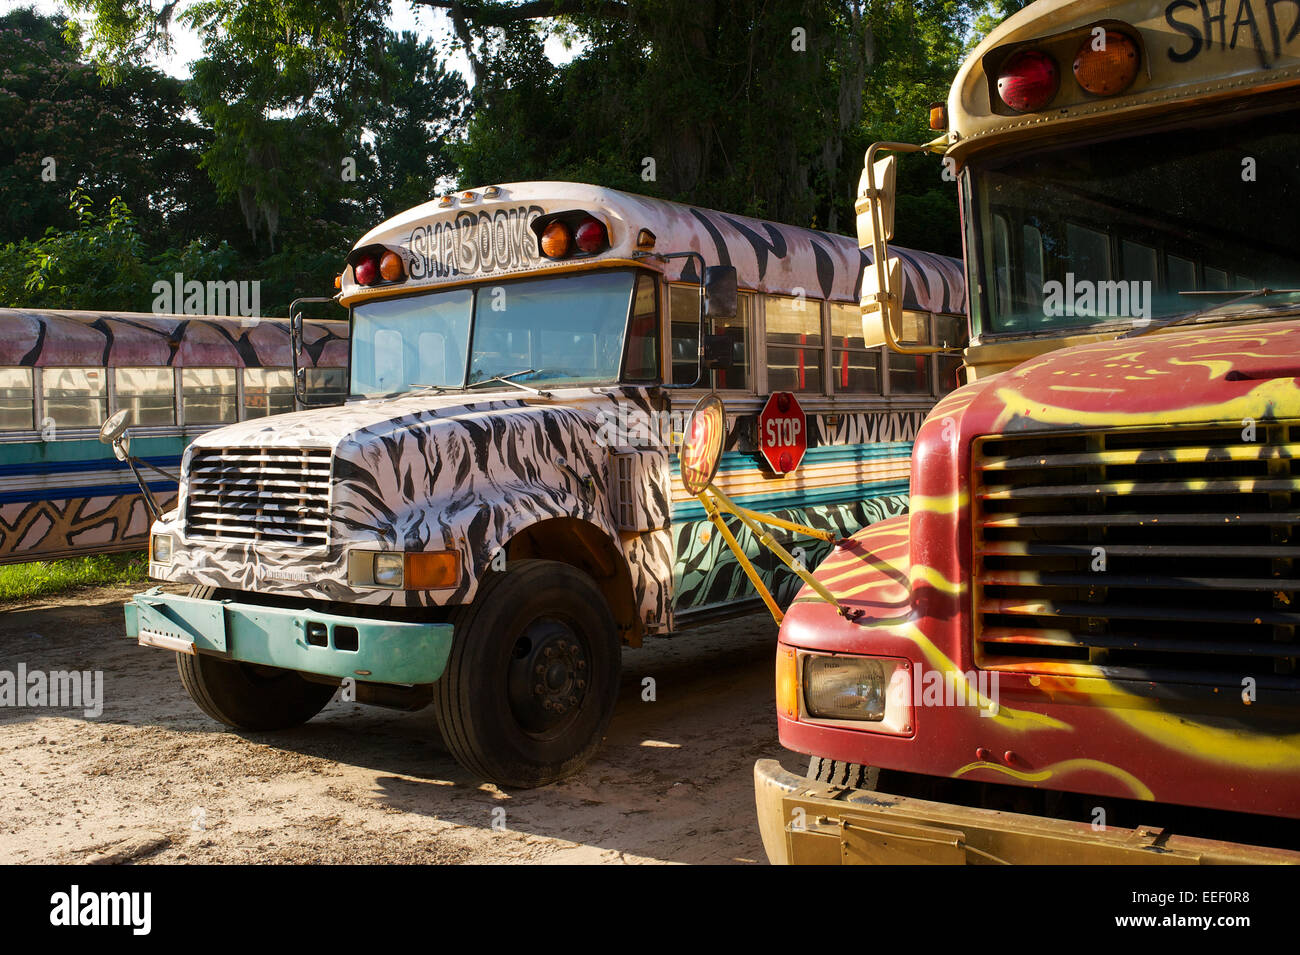 Tallahassee party buses Stock Photo - Alamy